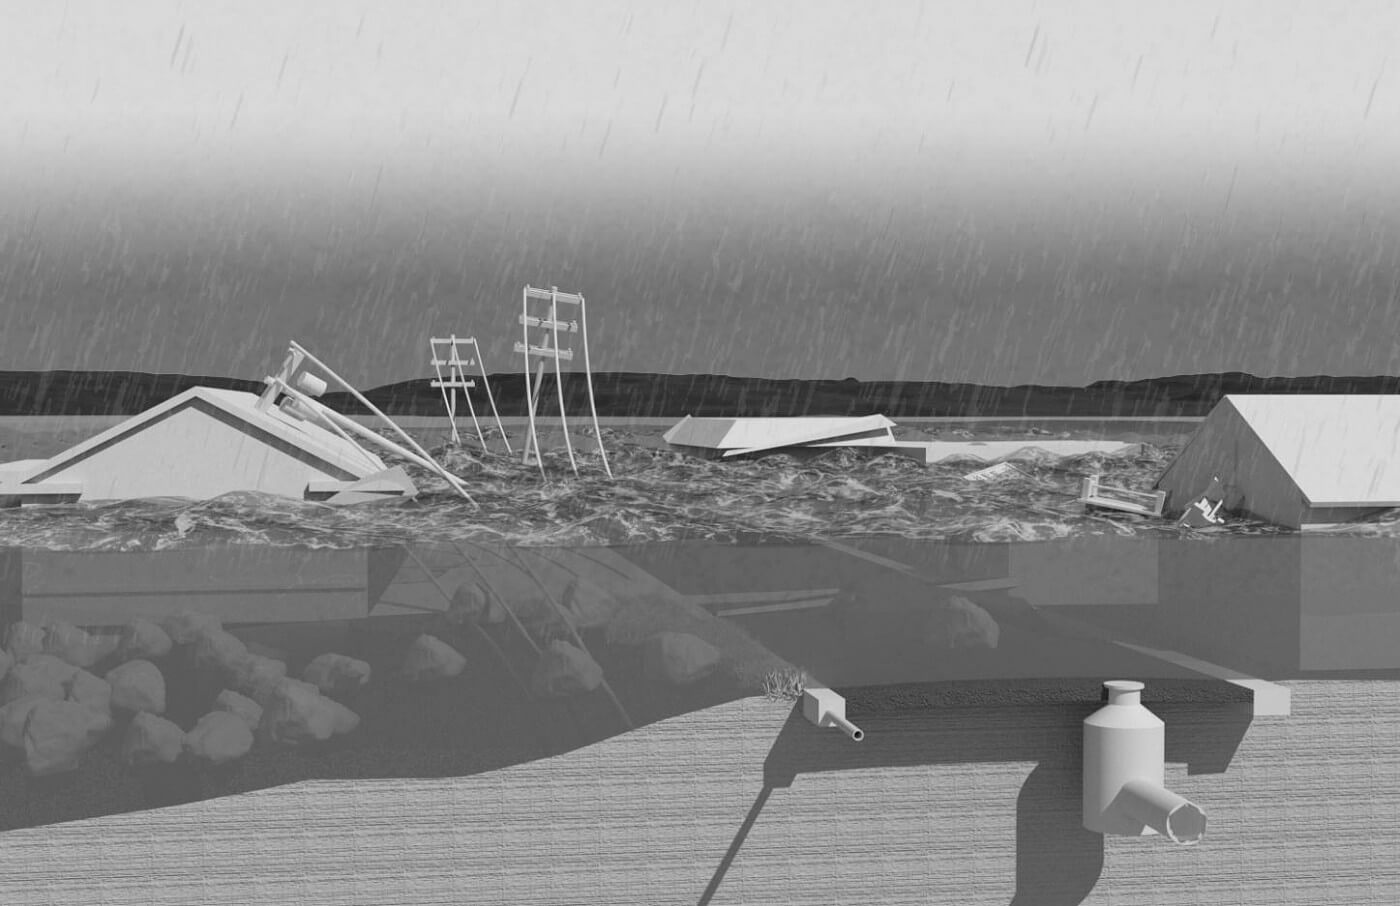 The Essex Causeway after the Great Storm of 2038, Typologies of Vulnerability: The Case of Cape Ann; Harvard GSD Office for Urbanization, 2022.